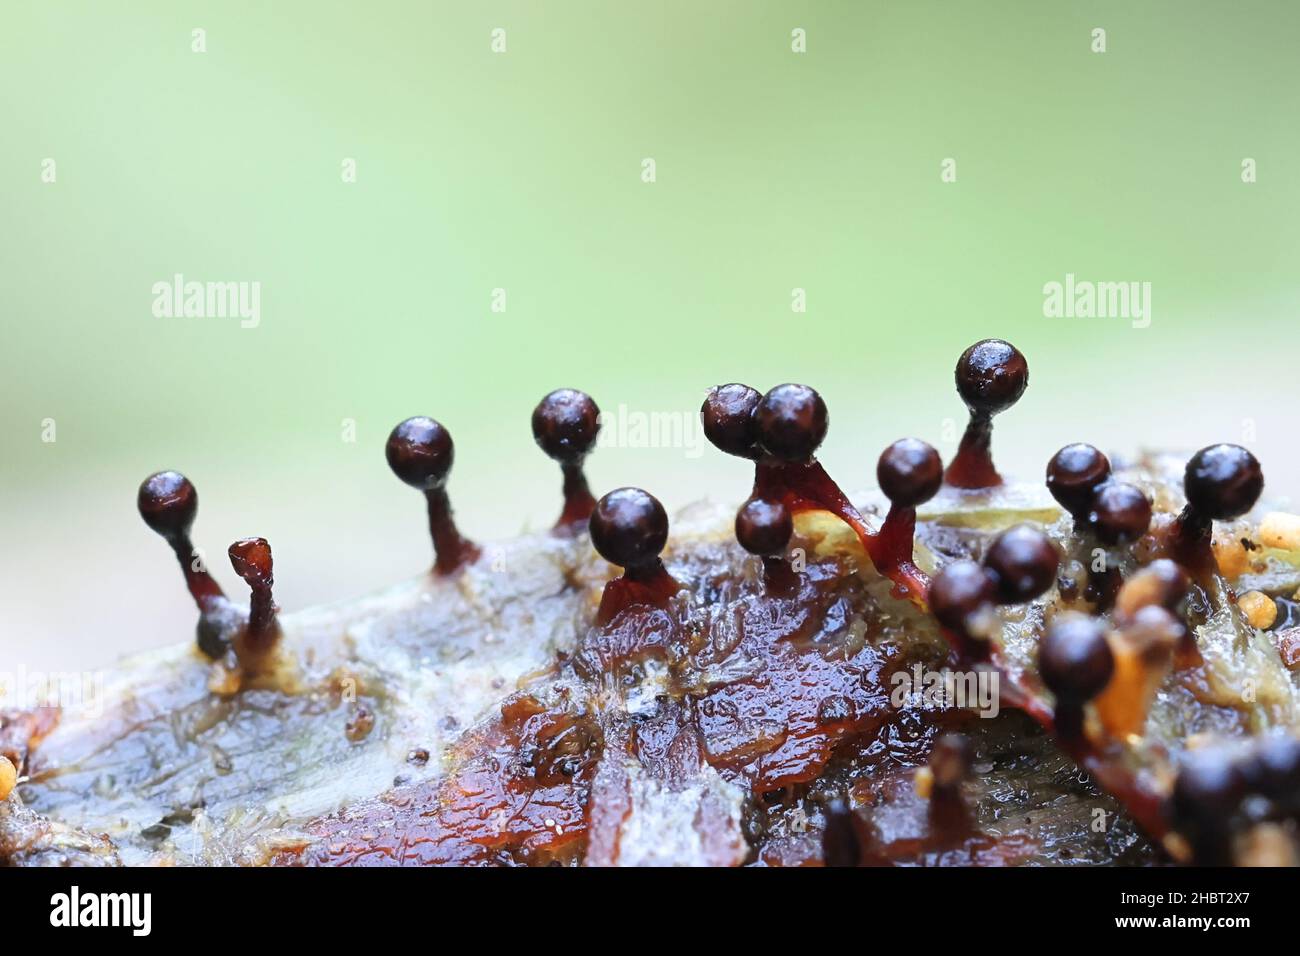 A white slime mould moving across a log Stock Photo - Alamy